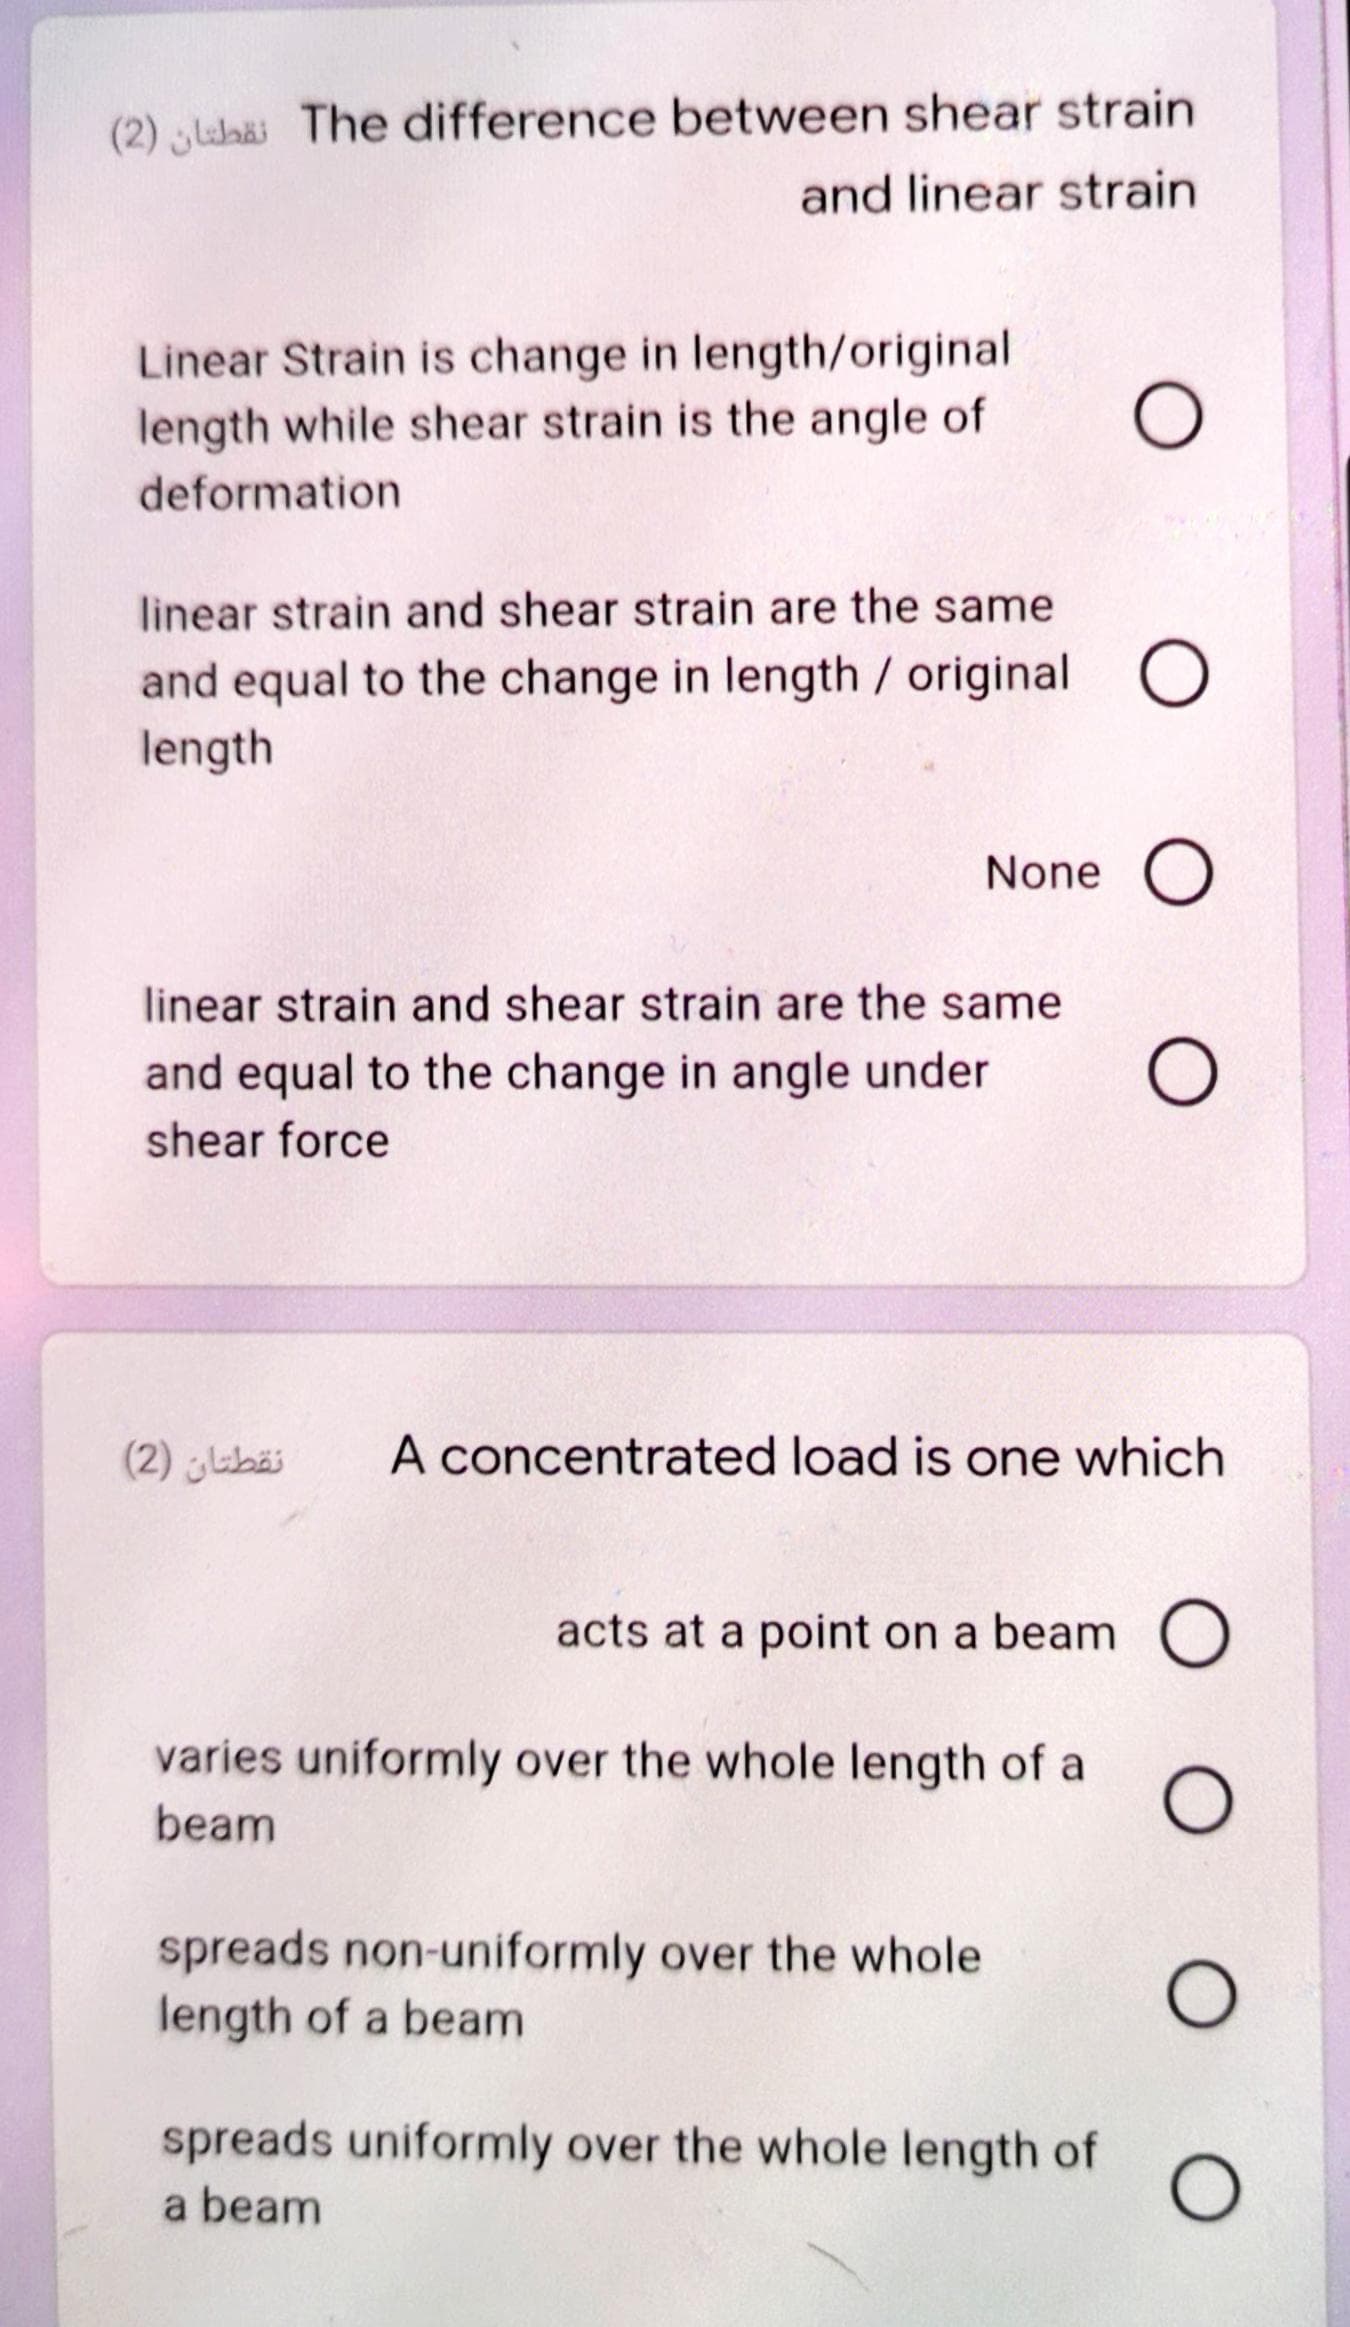 (2) lubäi The difference between shear strain
and linear strain
Linear Strain is change in length/original
length while shear strain is the angle of
deformation
linear strain and shear strain are the same
and equal to the change in length / original O
length
None O
linear strain and shear strain are the same
and equal to the change in angle under
shear force
(2) ibäi
A concentrated load is one which
acts at a point on a beam O
varies uniformly over the whole length of a
beam
